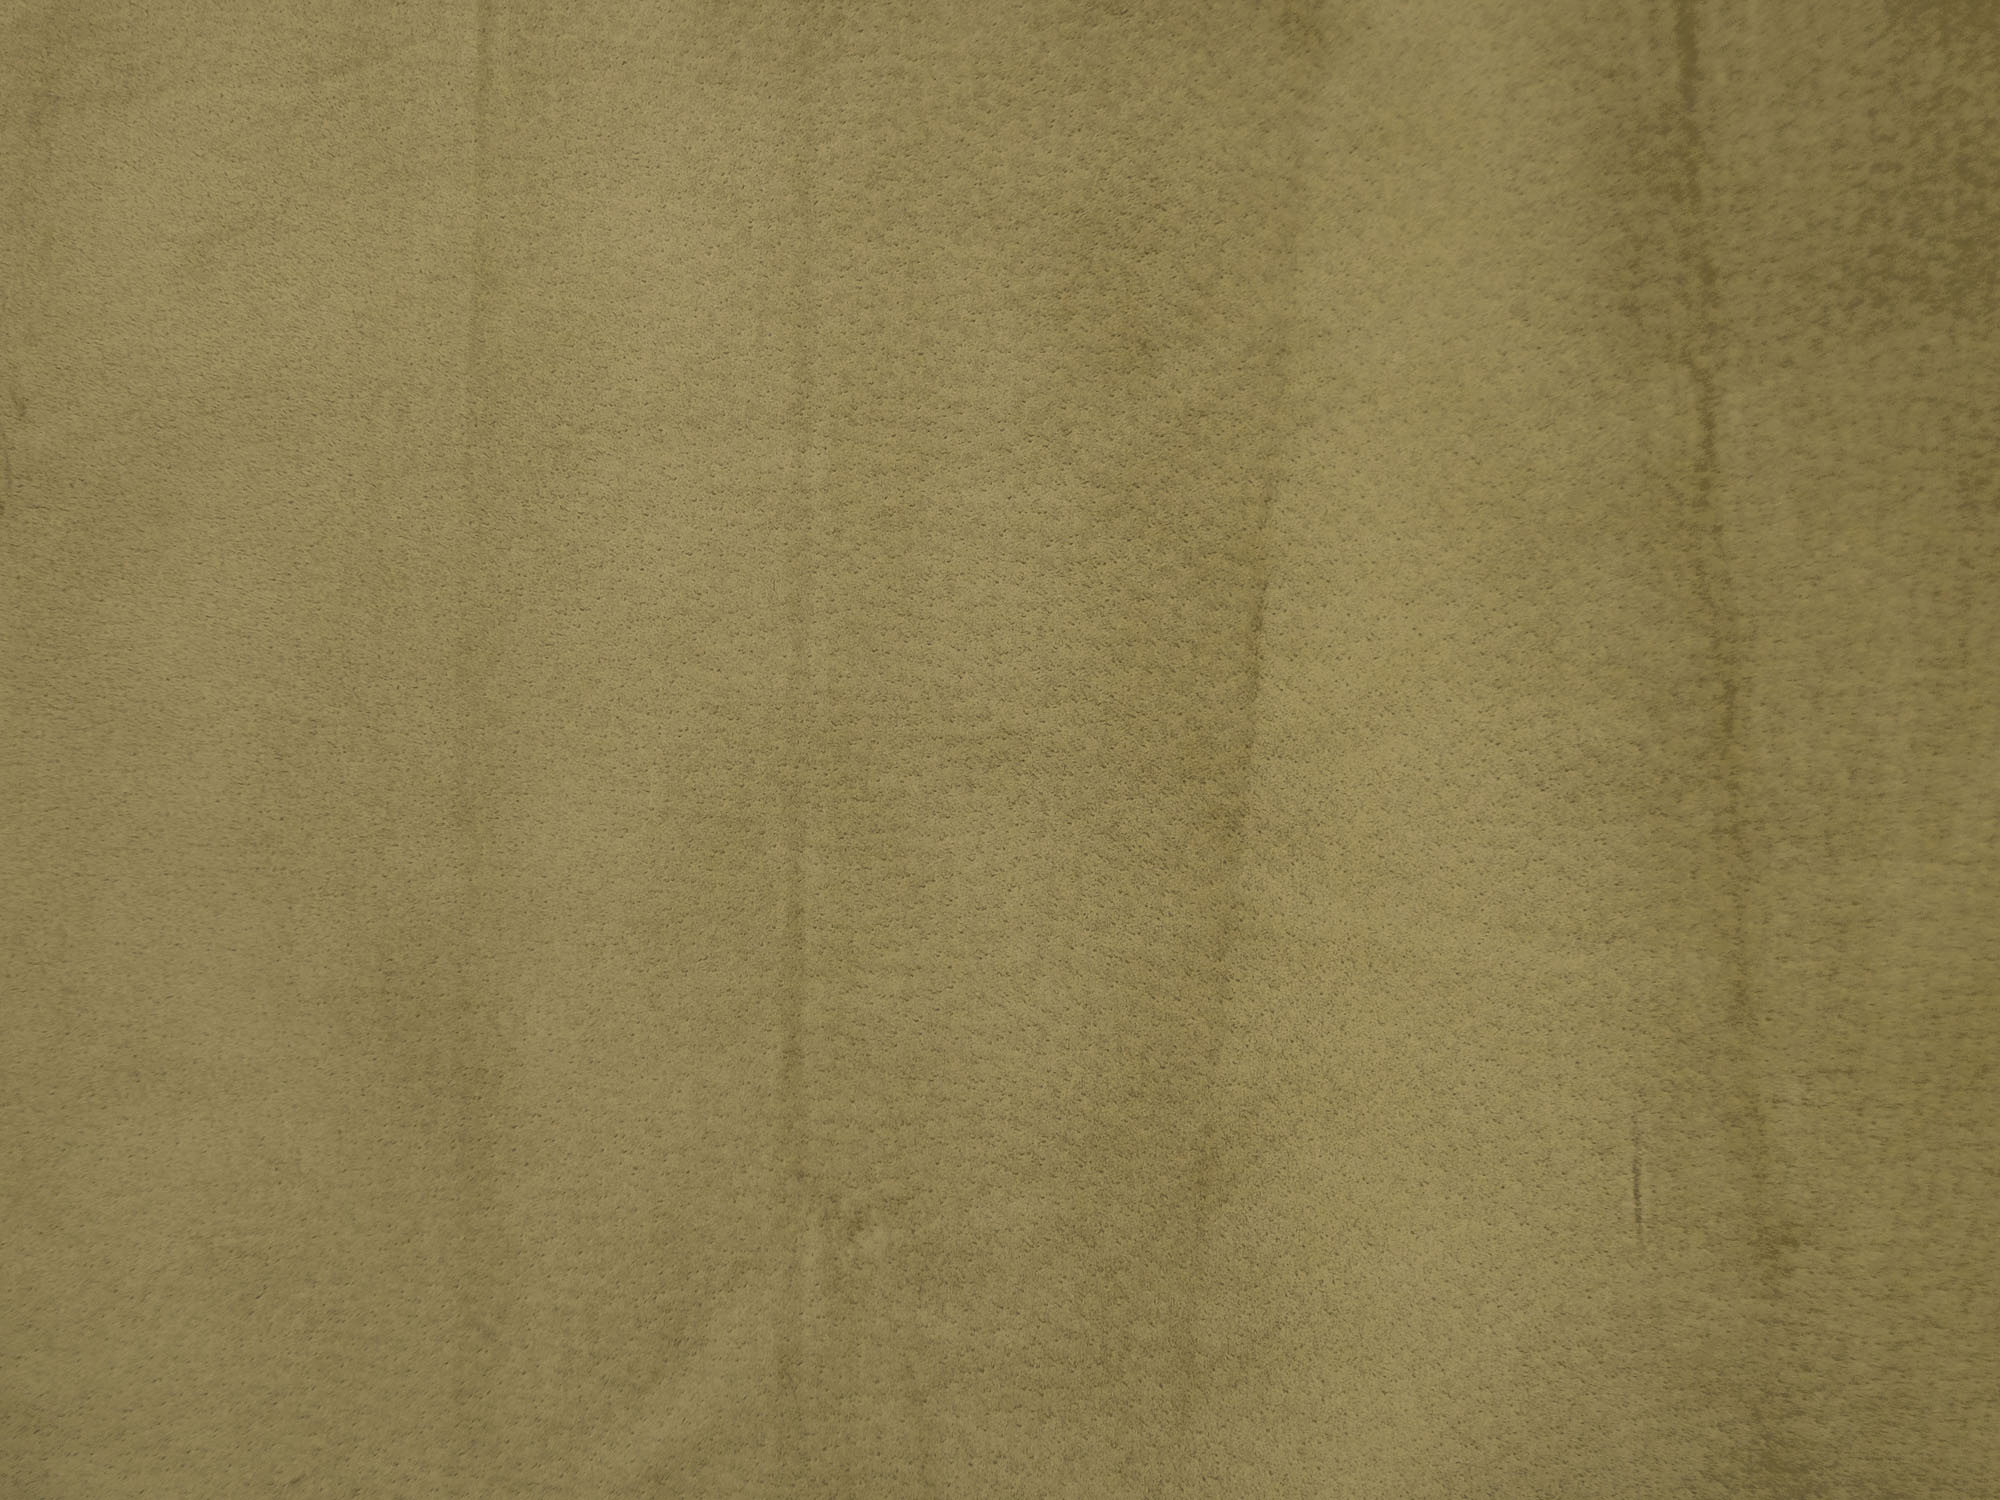 Pig Suede Leather: Tannery Run: Taupe (sq ft) 